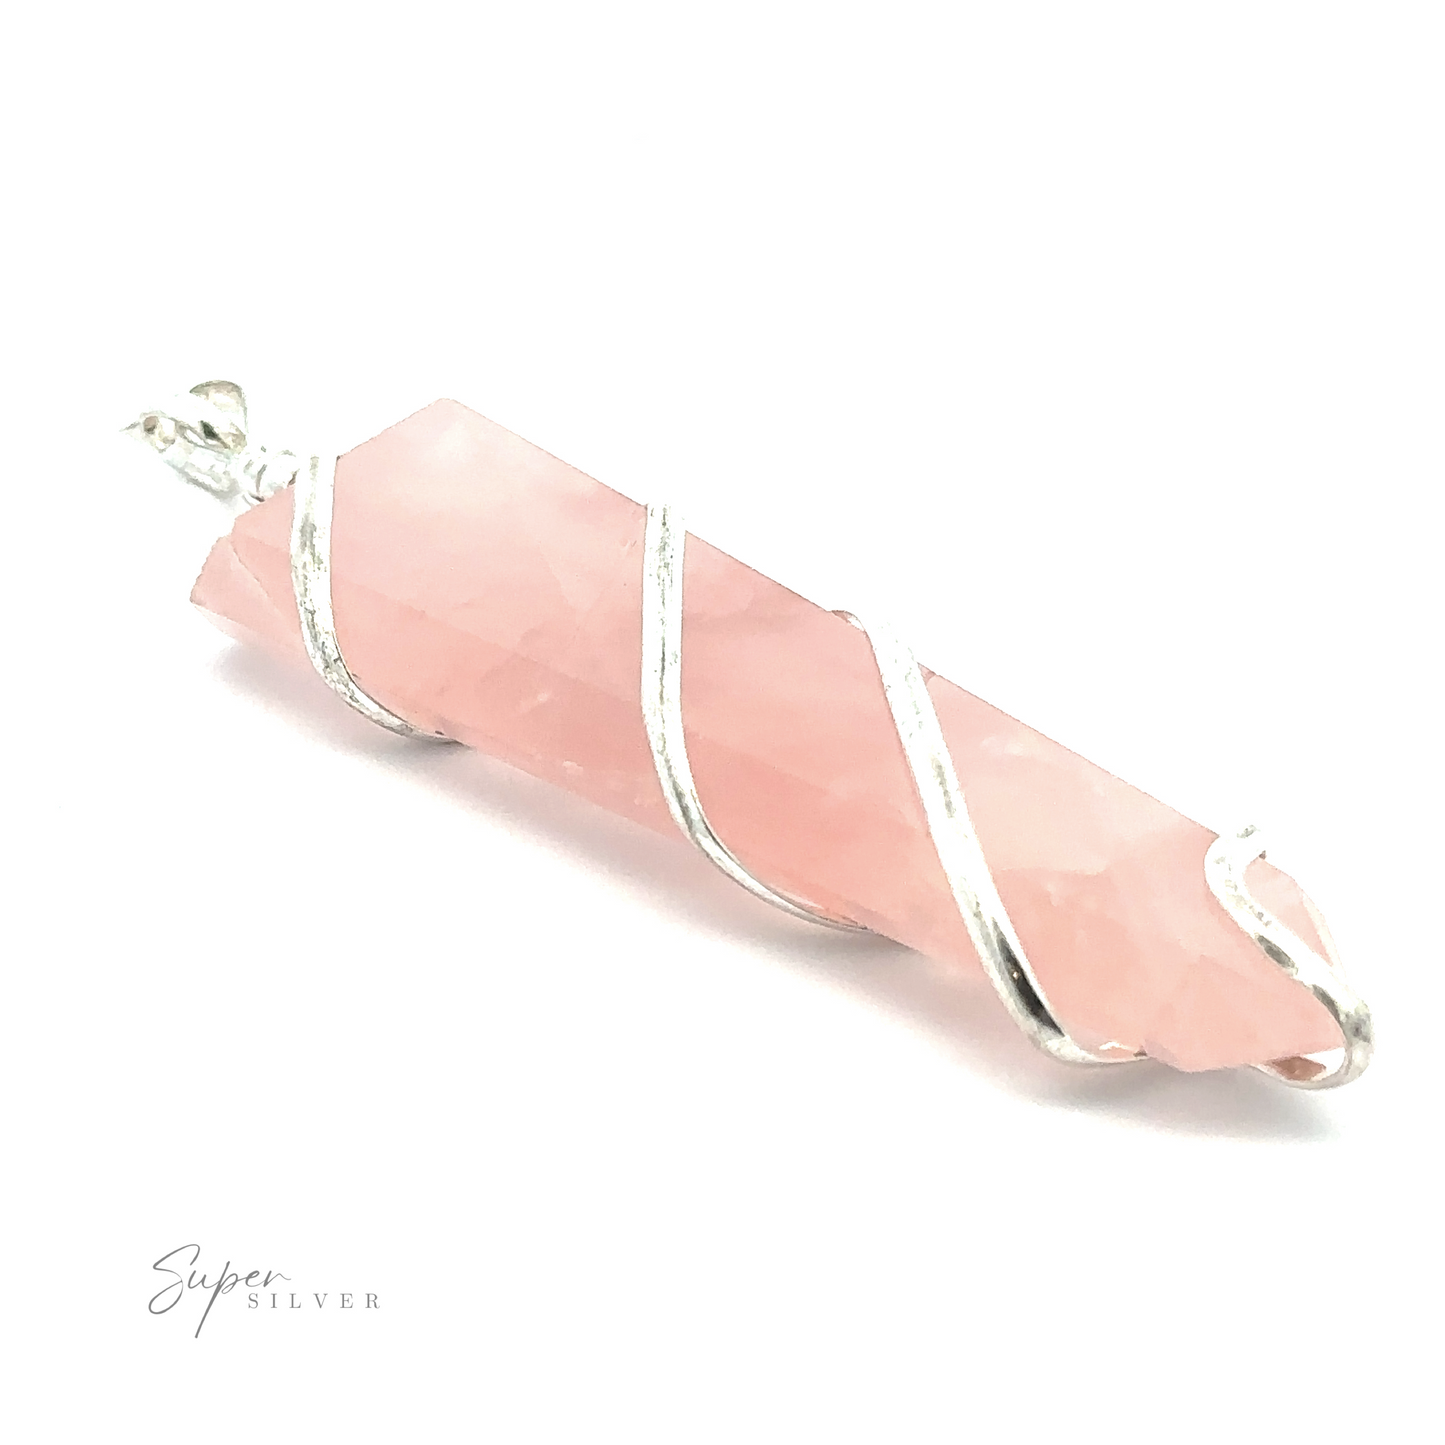 
                  
                    A pink crystal pendant, elegantly wire wrapped in silver, rests on a white background. The "Wire Wrapped Slab Pendant" logo appears in the bottom-left corner, emphasizing the fine craftsmanship of this gemstone jewelry.
                  
                